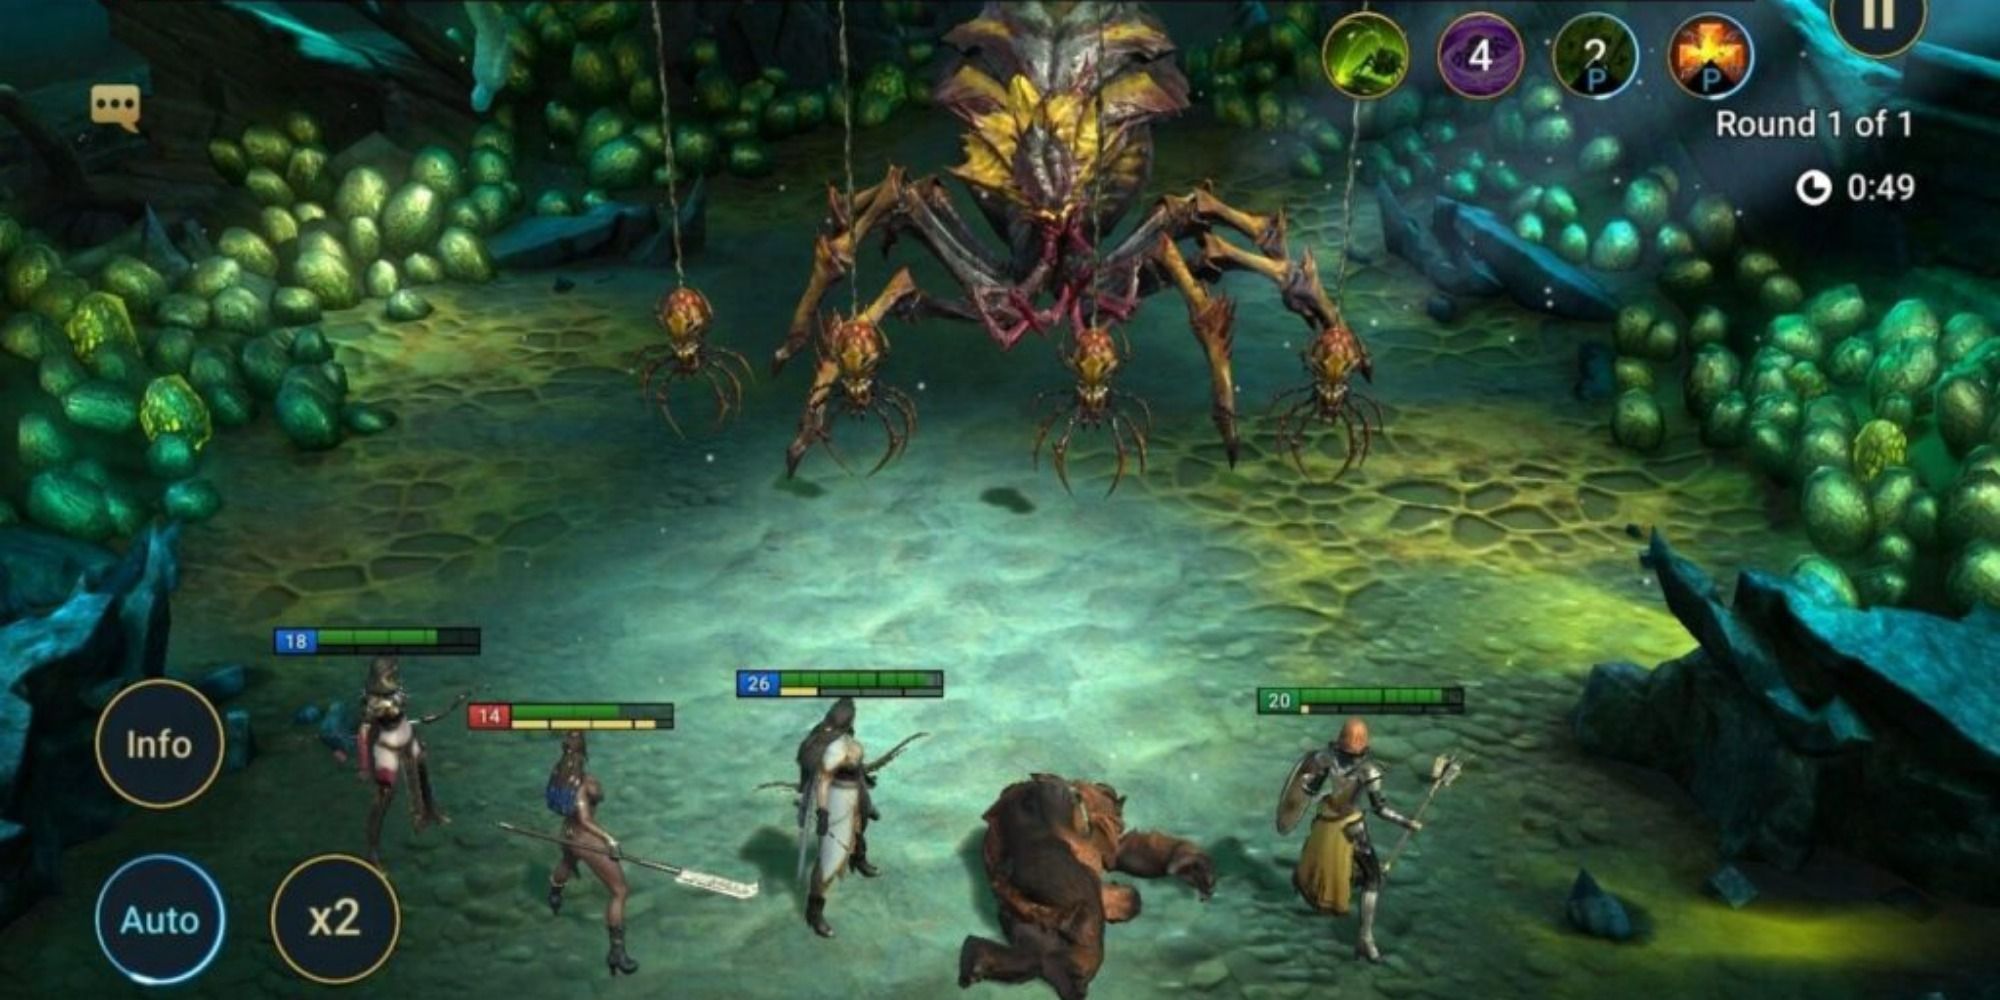 A team of heroes confronts a spider monster in a cave